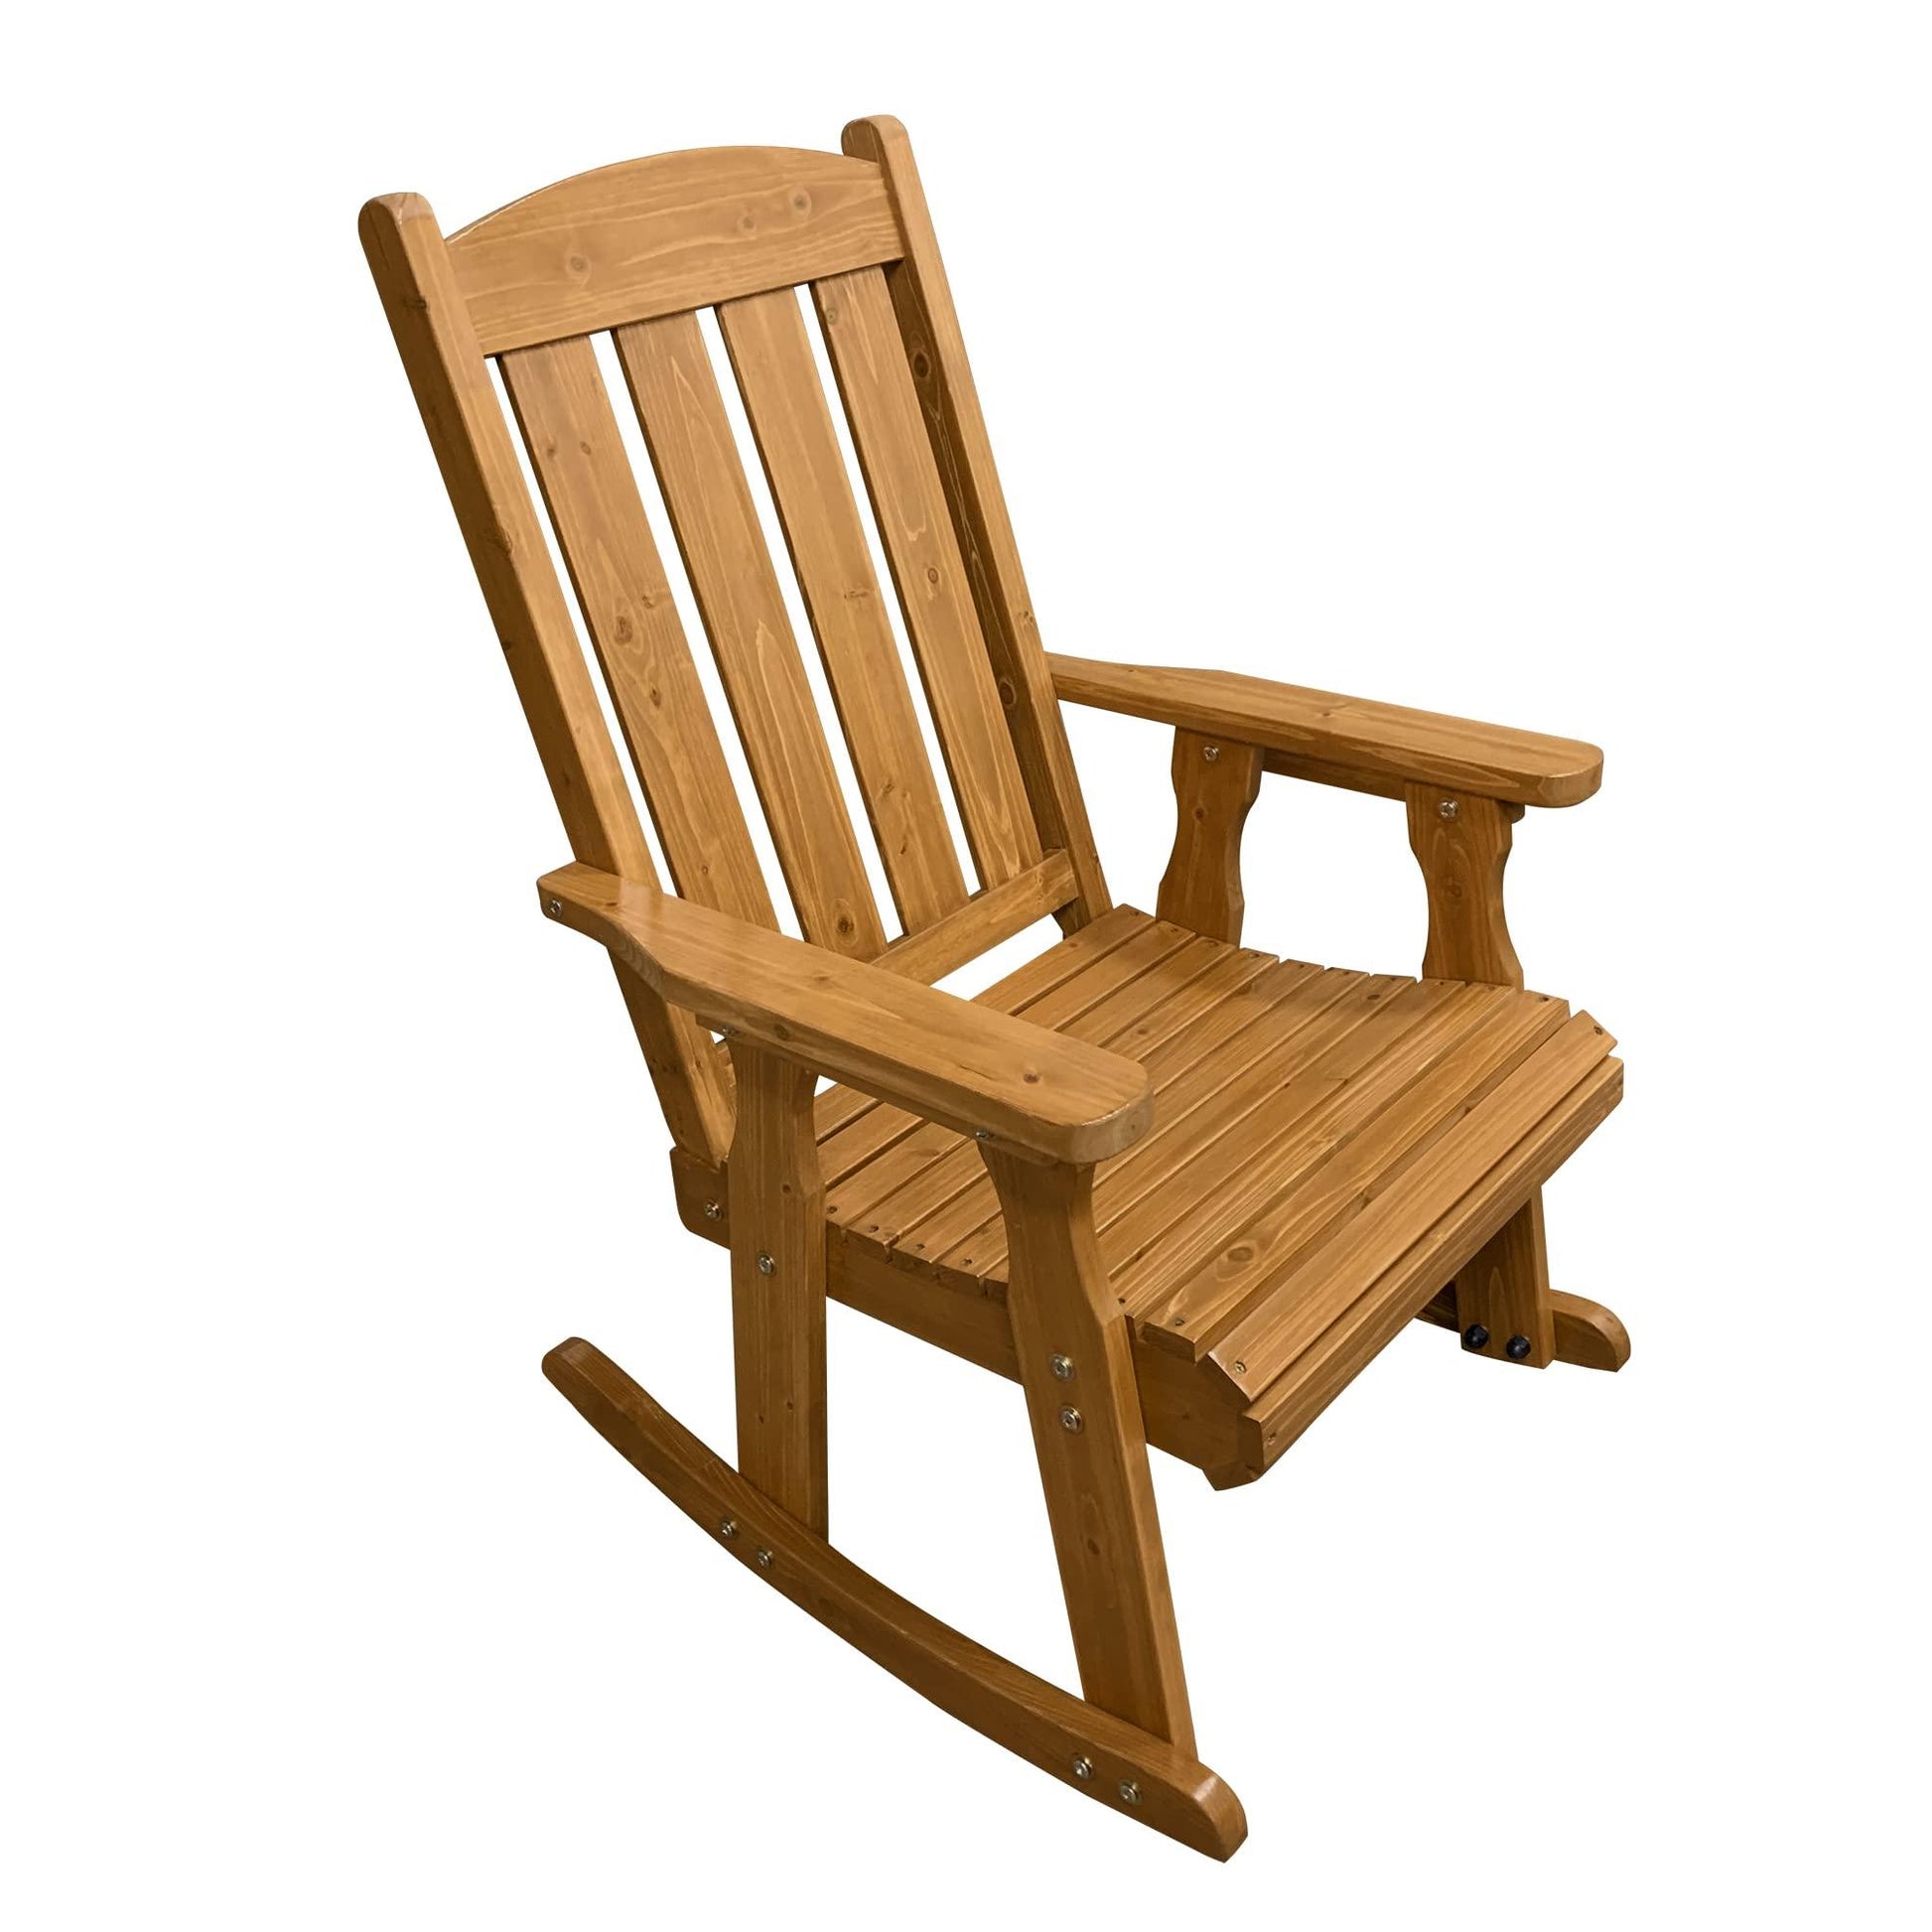 Wooden Rocking Chair with Comfortable Backrest Inclination, High Backrest and Deep Contoured Seat, Solid Fir Wood, Heavy Duty 600 LBS, for Both Outdoor and Indoor, Backyard, Porch and Patio - CookCave